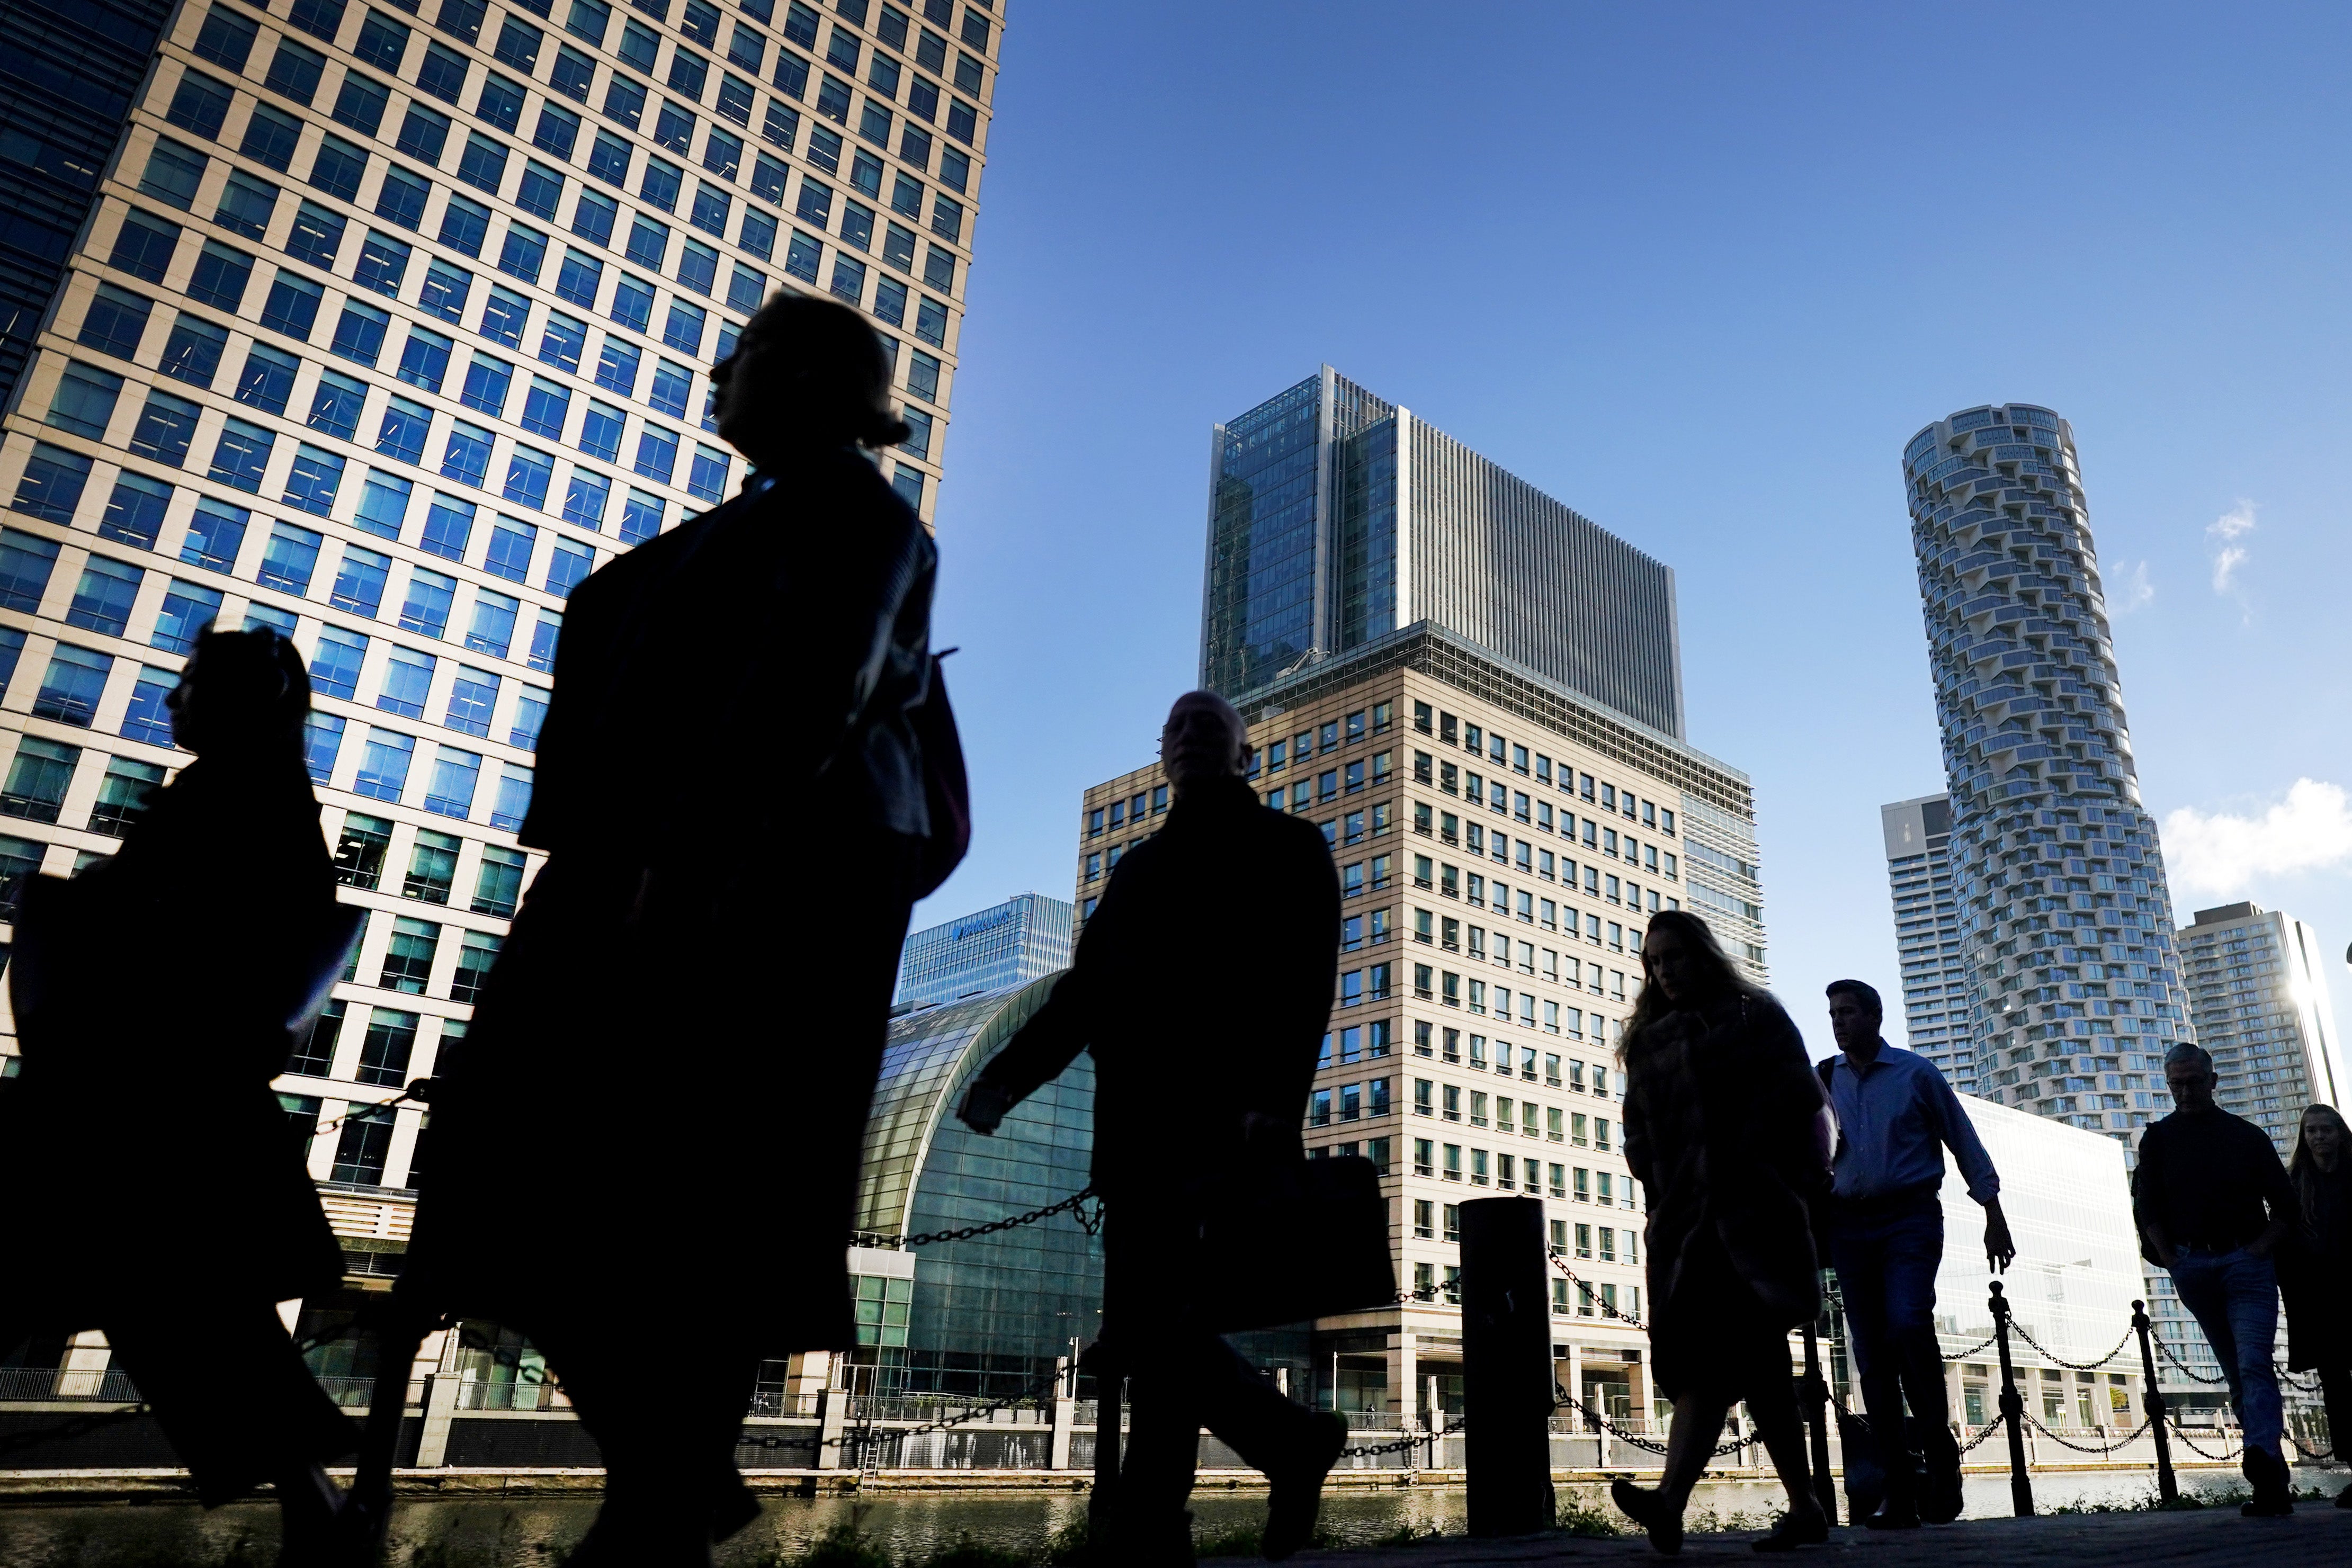 Office workers and commuters walk through Canary Wharf in London (Victoria Jones/PA)